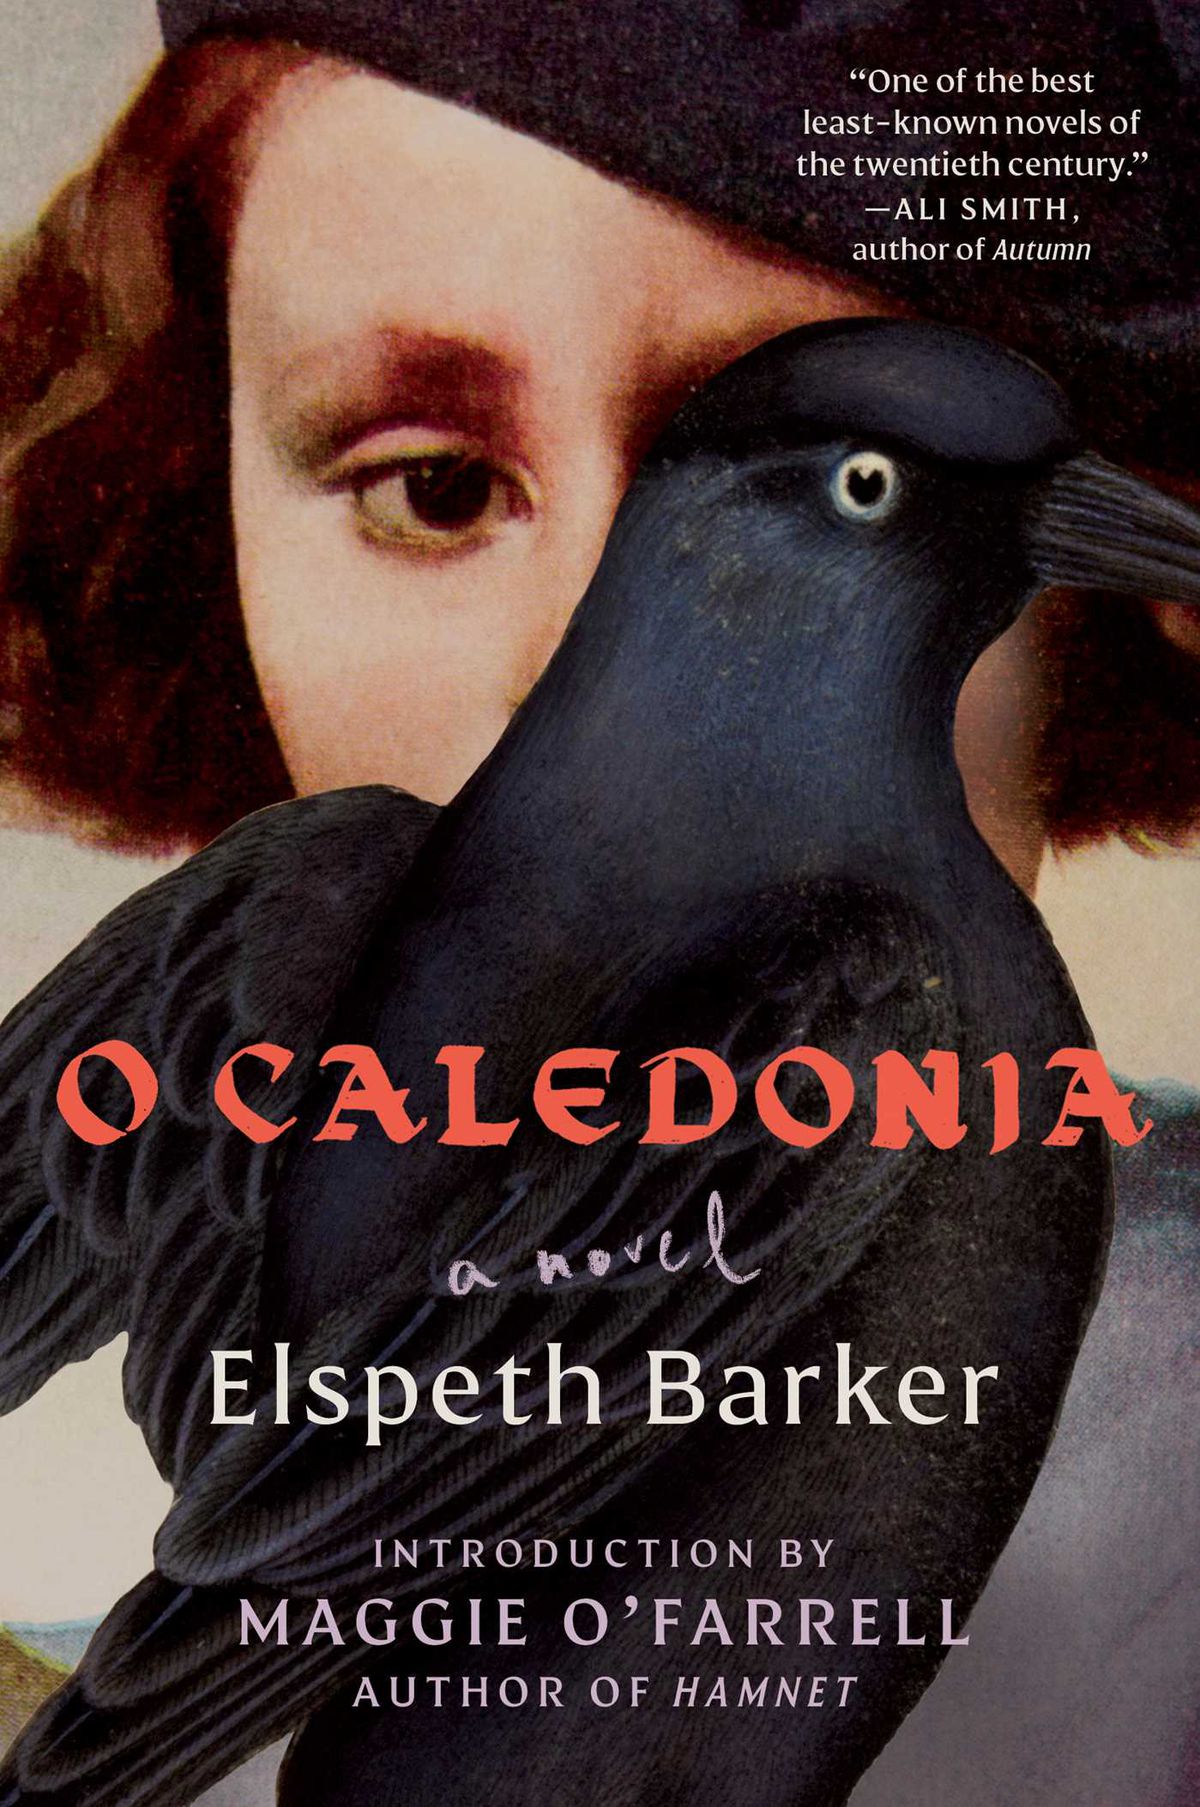 The cover of the novel “O Caledonia” features a woman’s face partially obscured by a black bird.